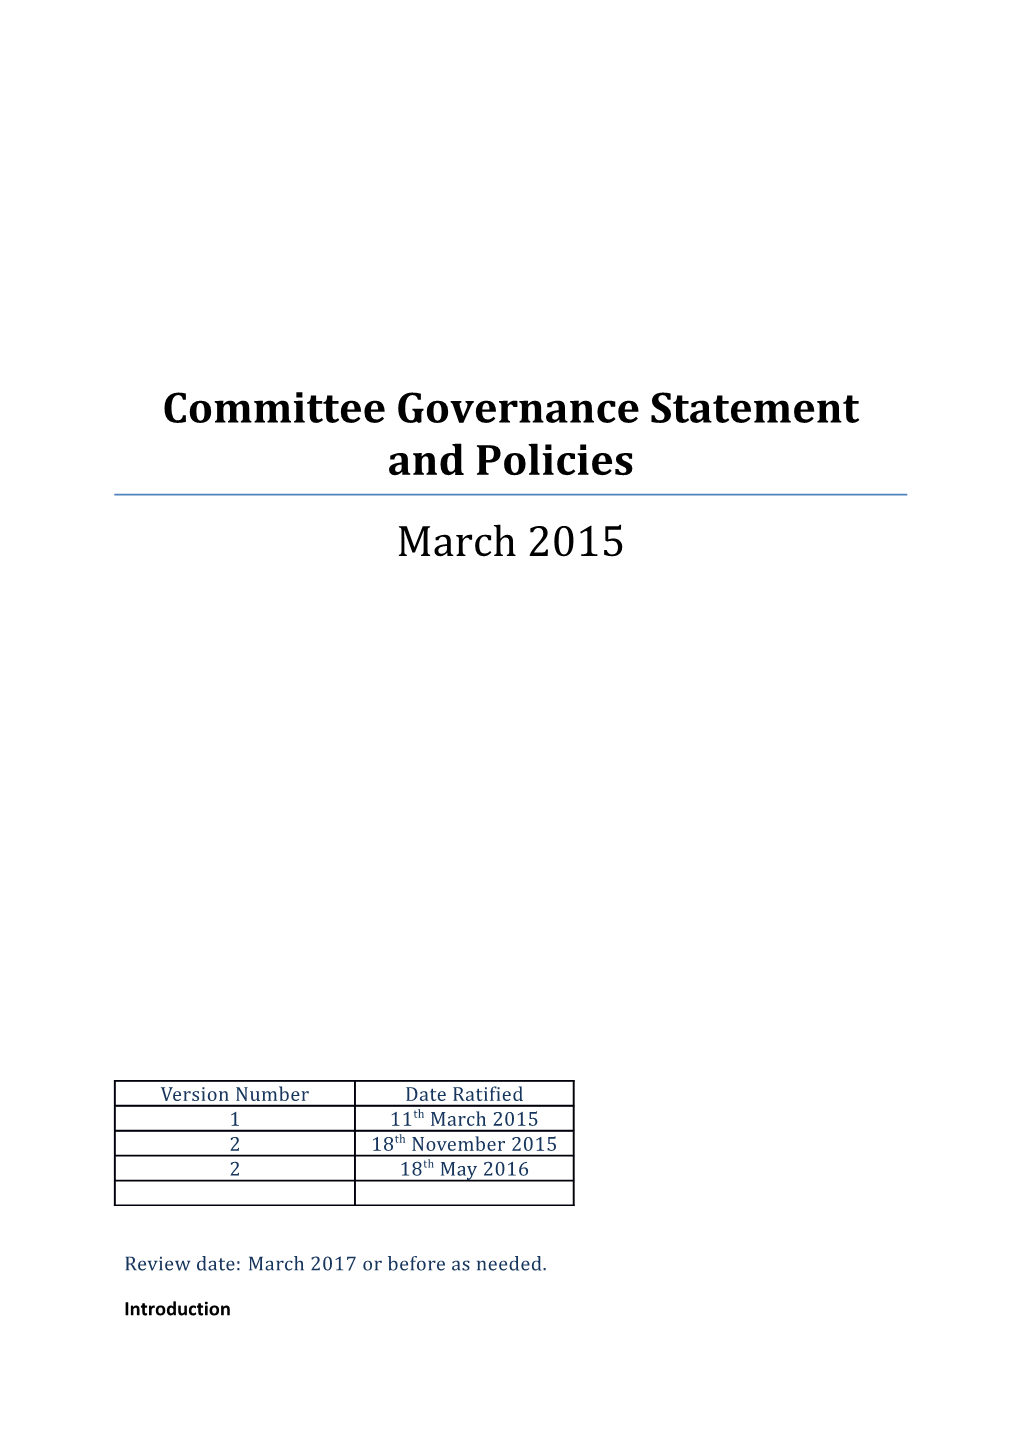 Committee Governance Statement and Policies